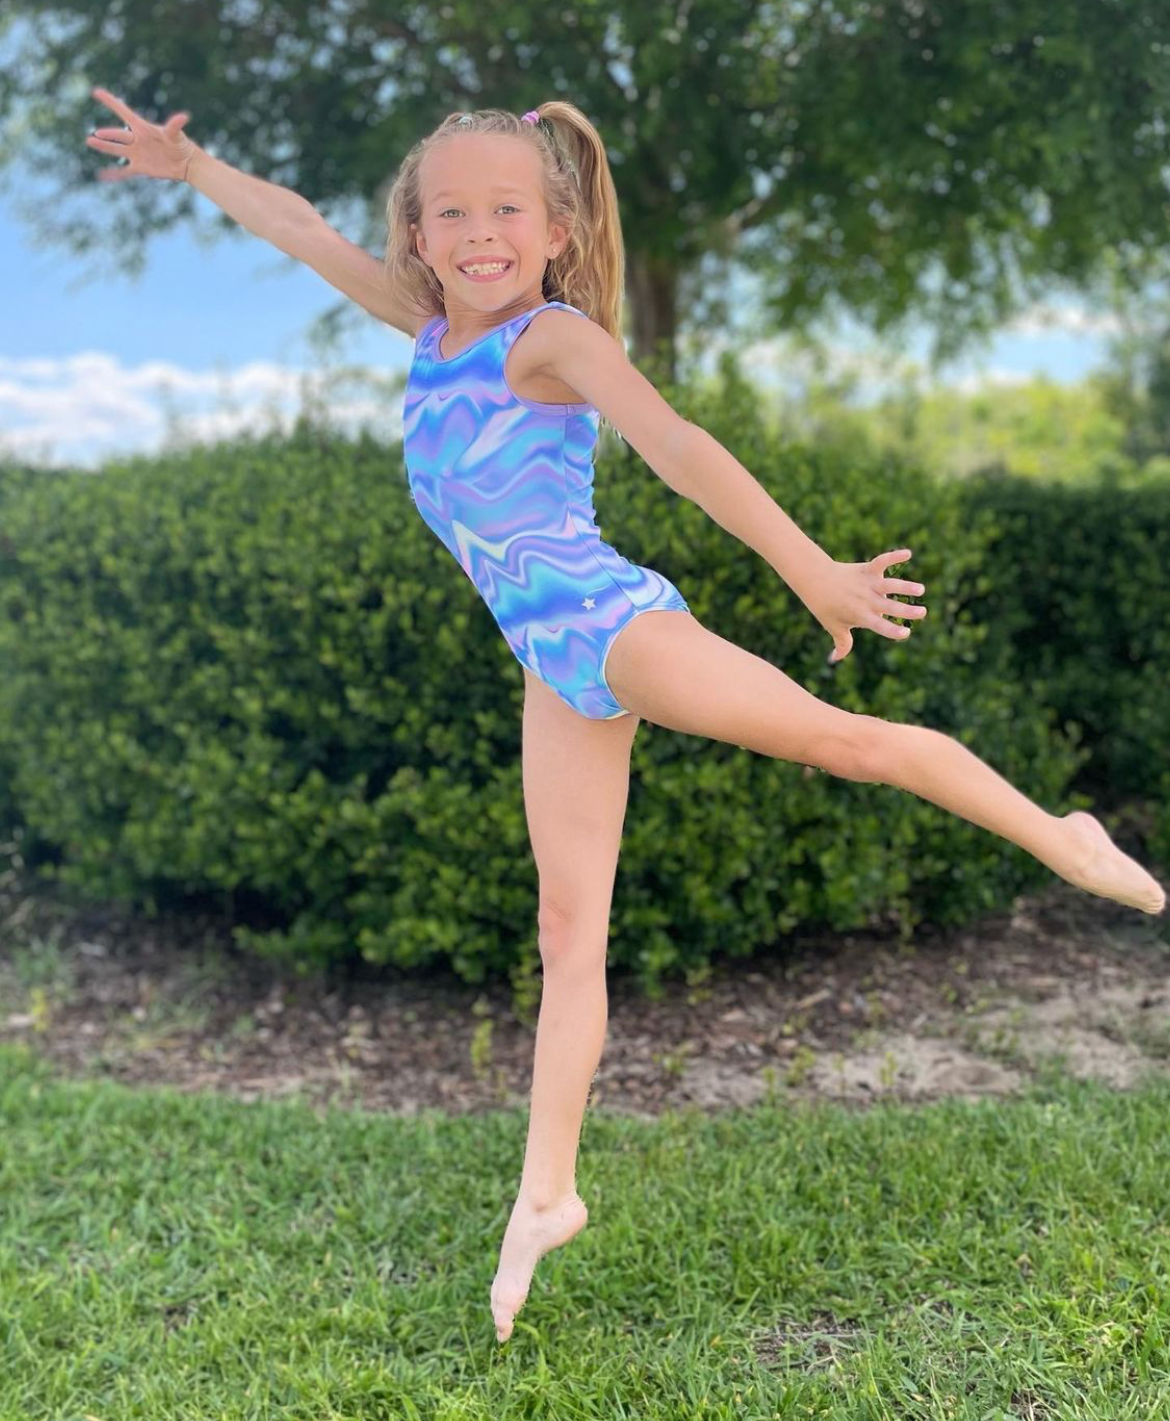 5 Important Gymnastics Safety Tips for Any Level